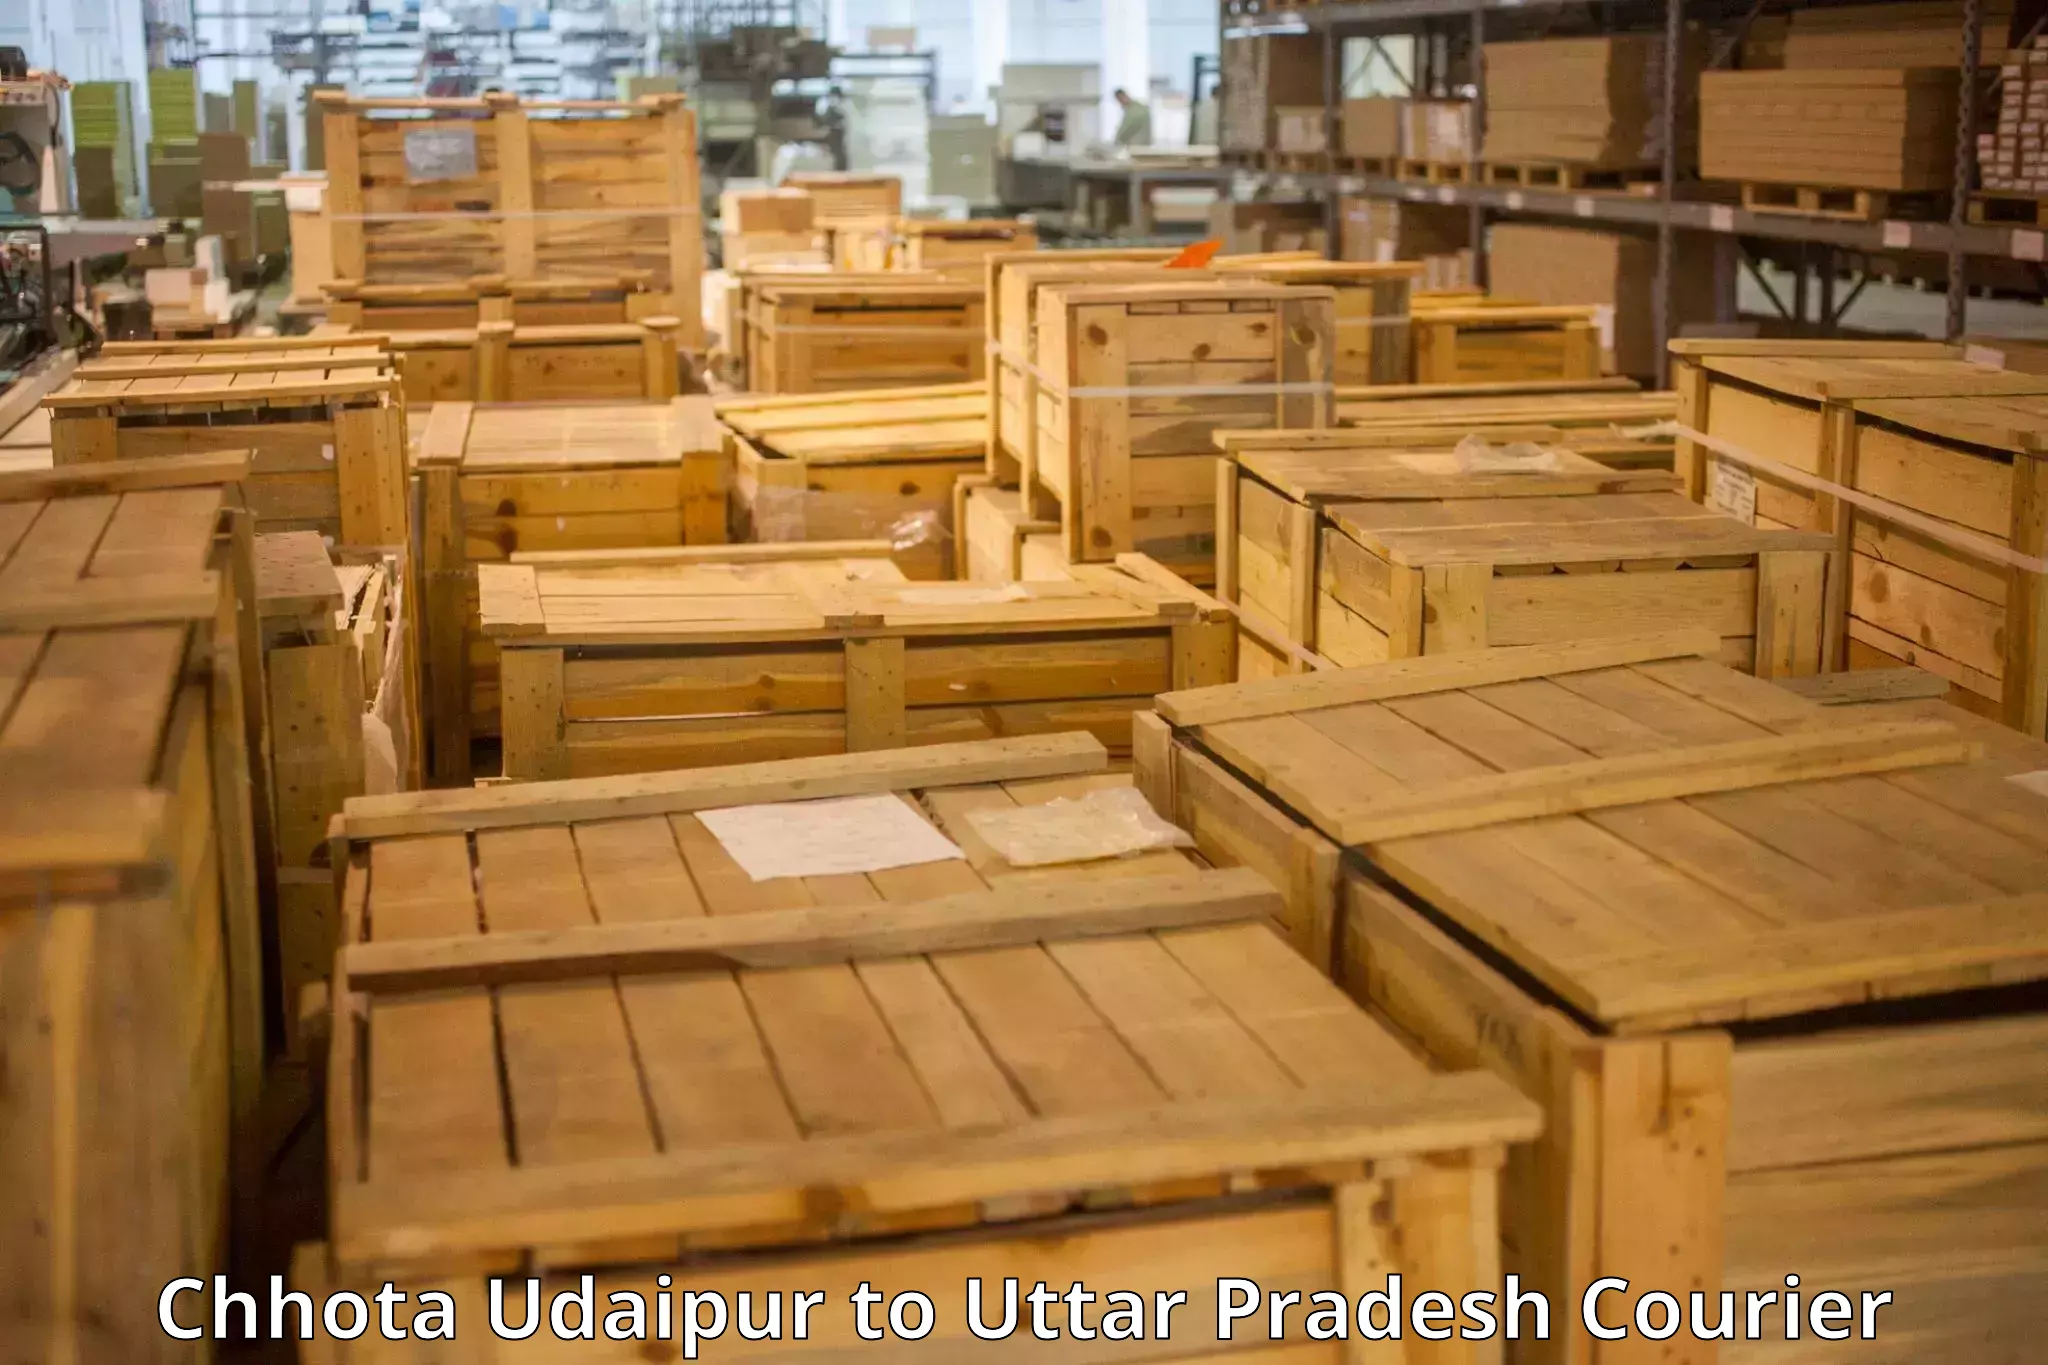 Online luggage shipping booking Chhota Udaipur to Kanpur